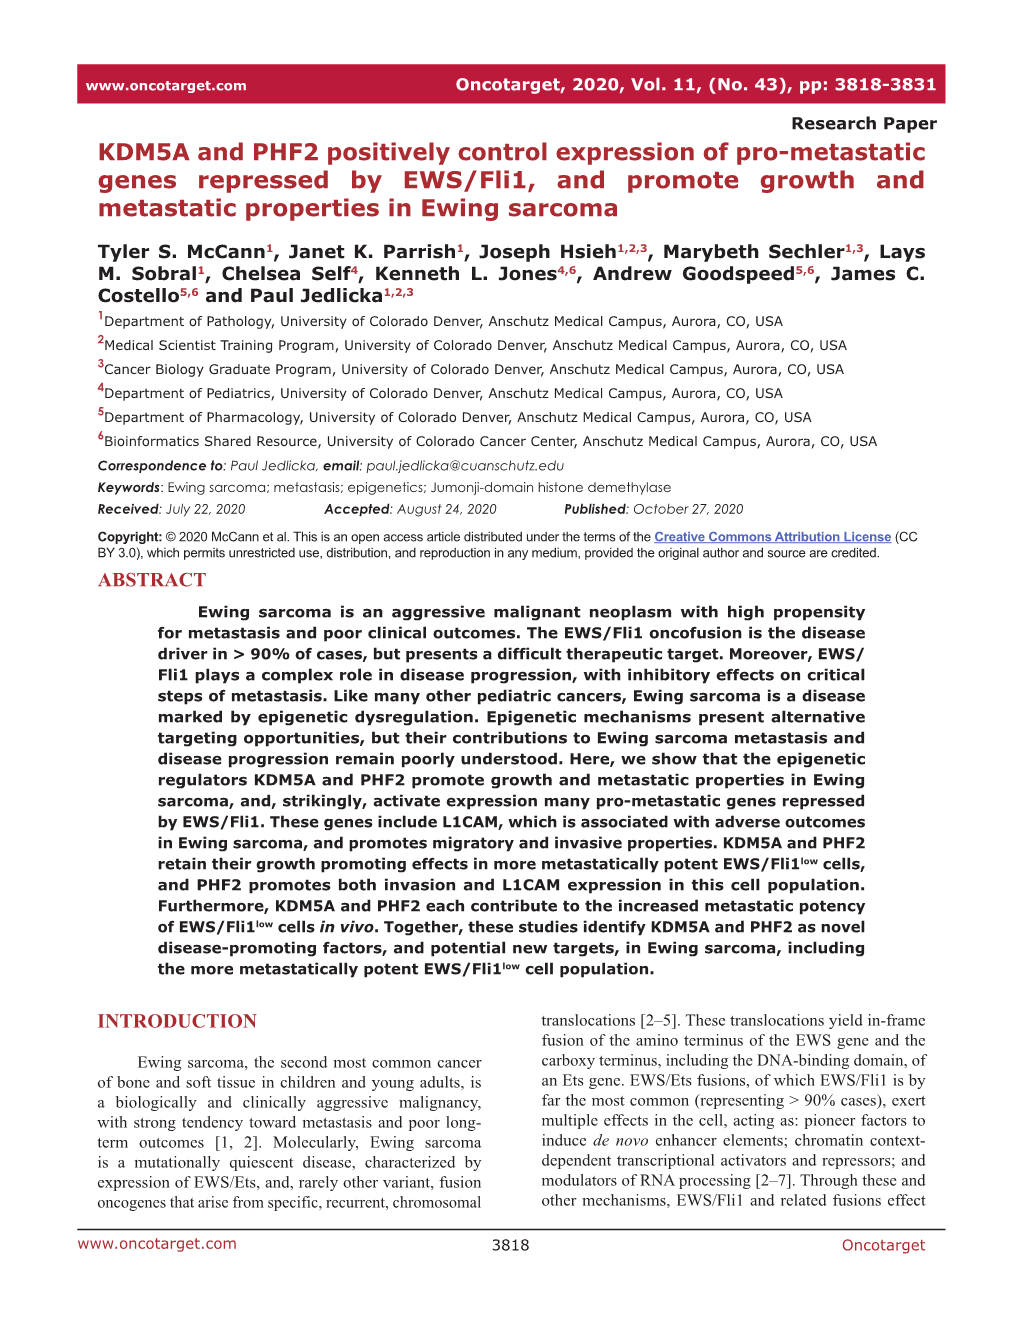 KDM5A and PHF2 Positively Control Expression of Pro-Metastatic Genes Repressed by EWS/Fli1, and Promote Growth and Metastatic Properties in Ewing Sarcoma